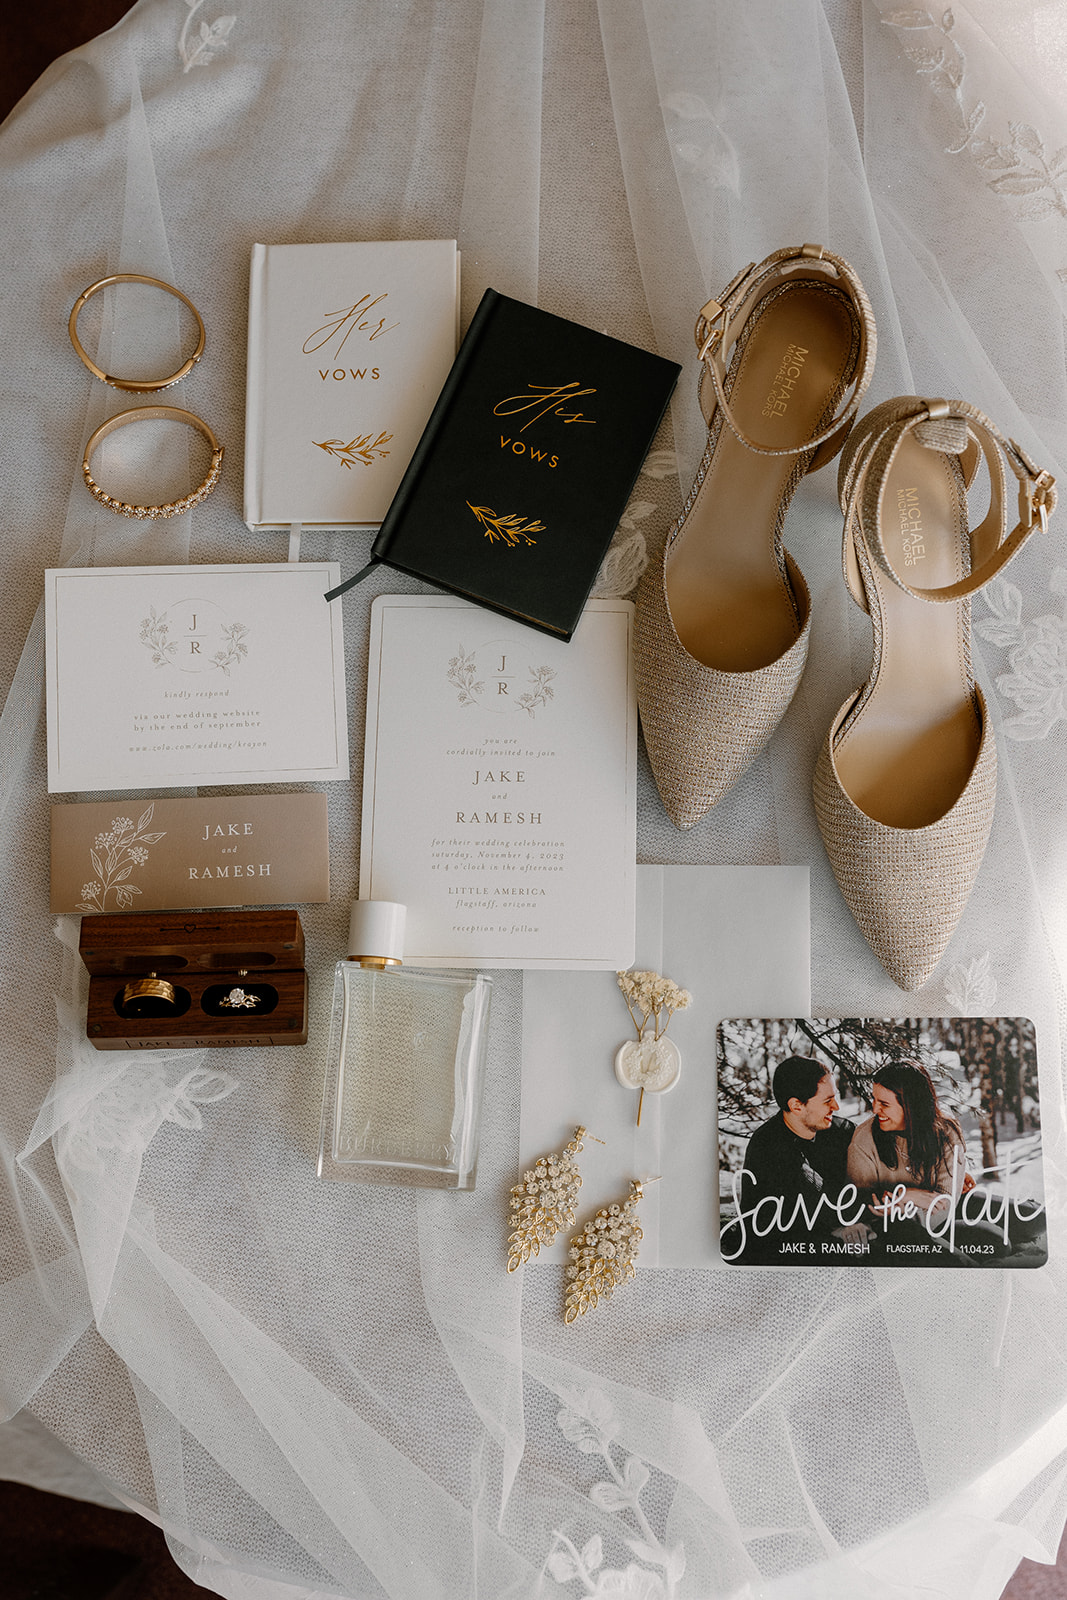 Brides wedding details laid out for a creative wedding detail flat lay photo